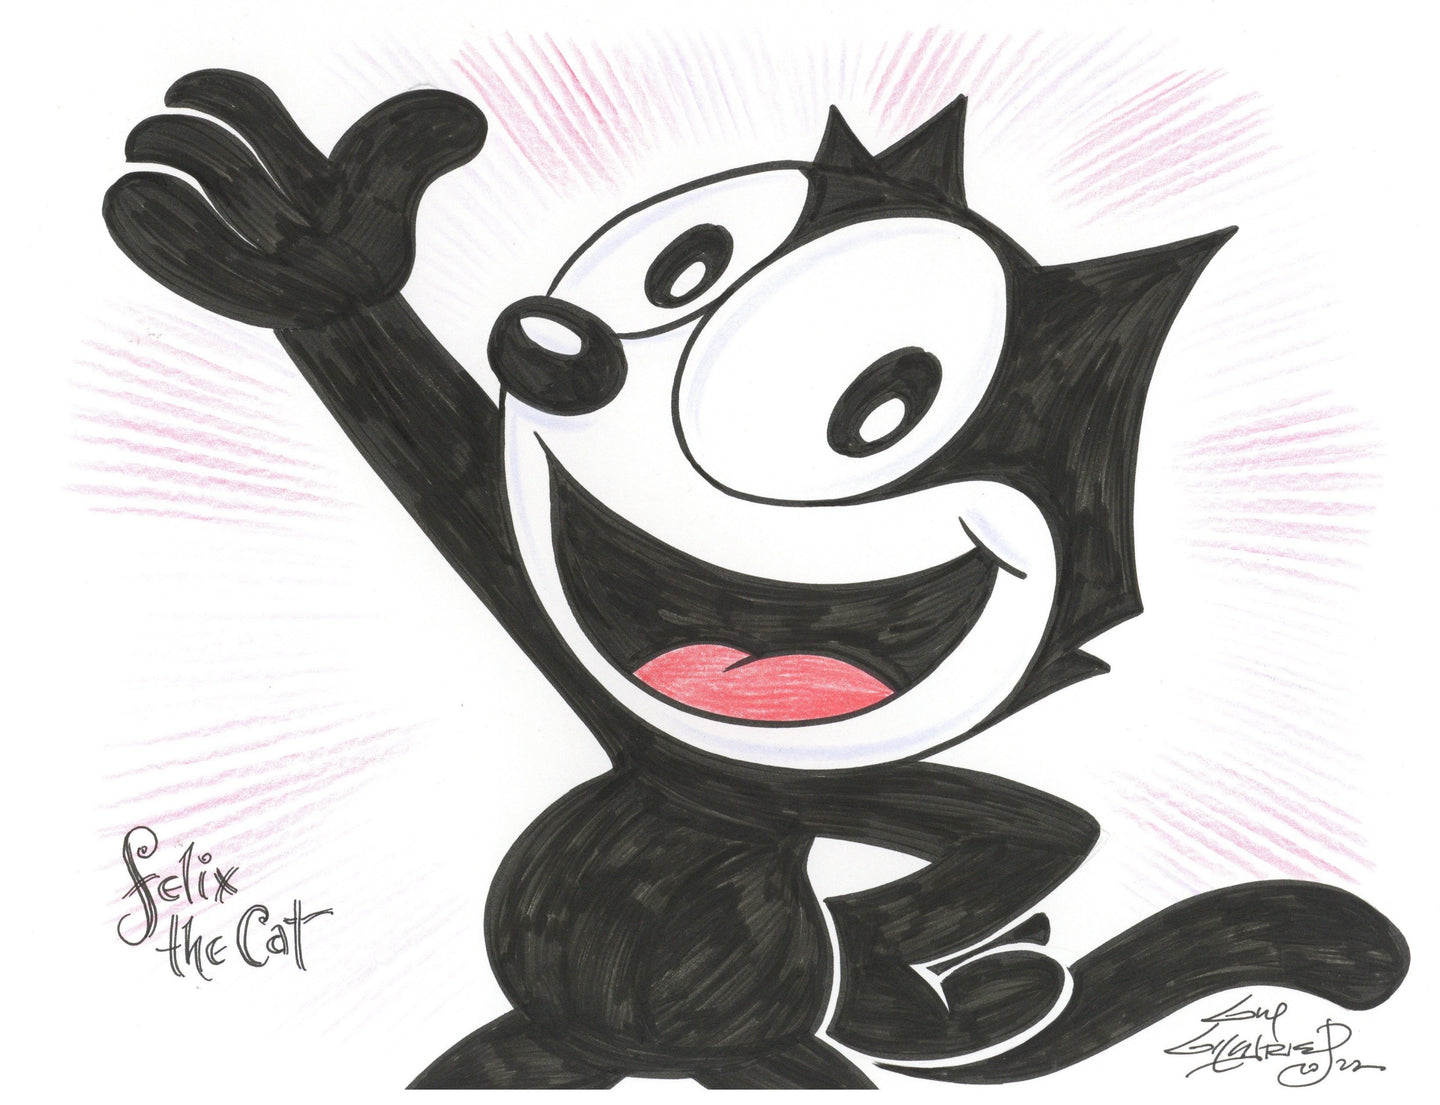 Felix the Cat Original Art 8.5x11 Sketch - Created by Guy Gilchrist